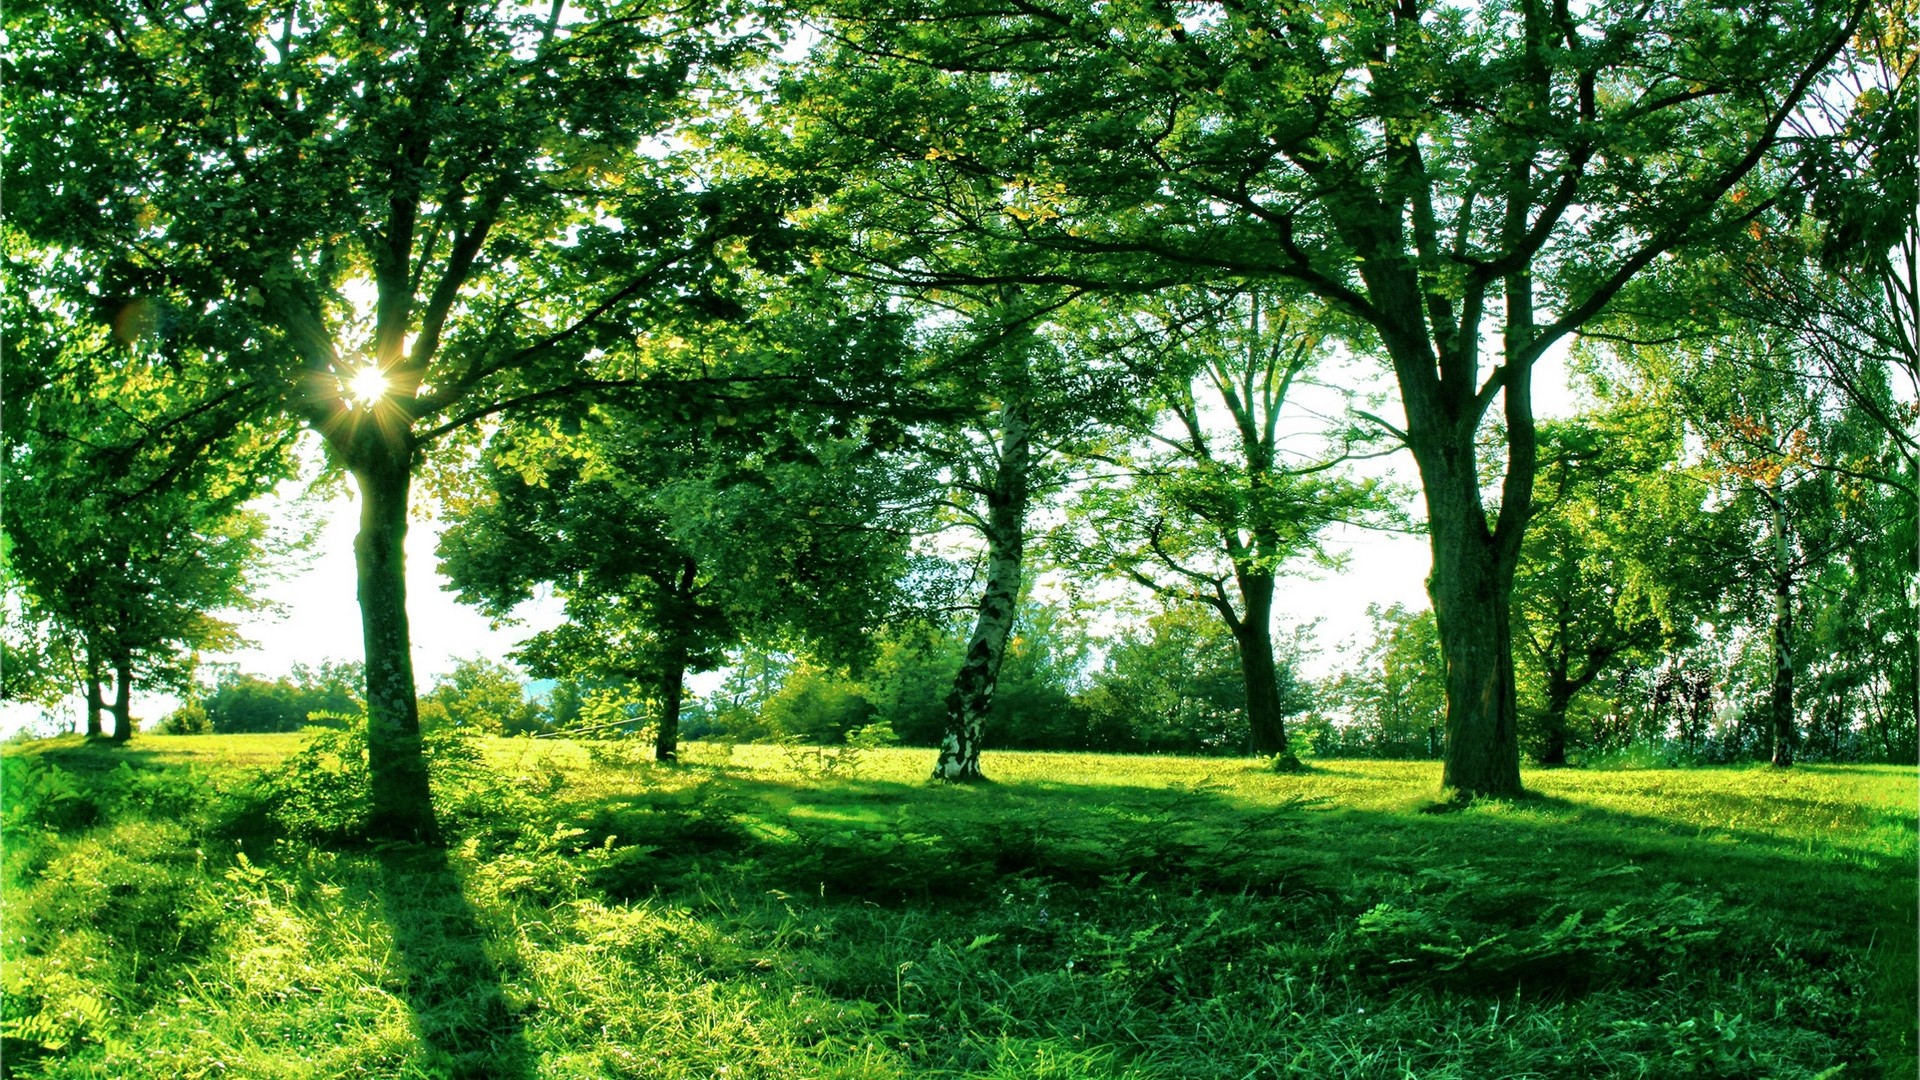 1920x1080 wallpapers: sun, light, trees, branches, green, summer, grass, alley (image)